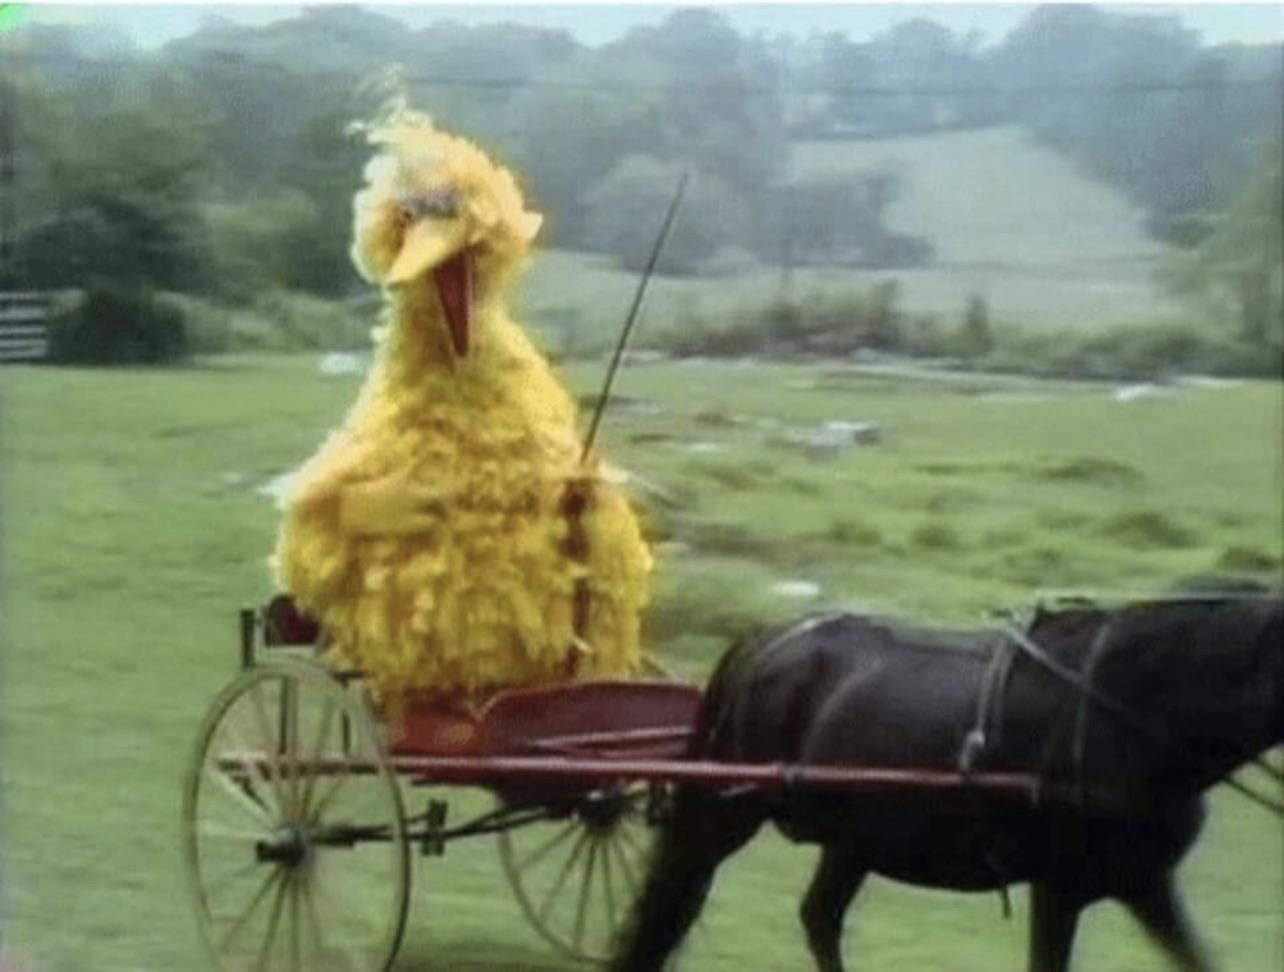 An Emu mocks an enslaved Australian POW from his carriage during The Great Emu War